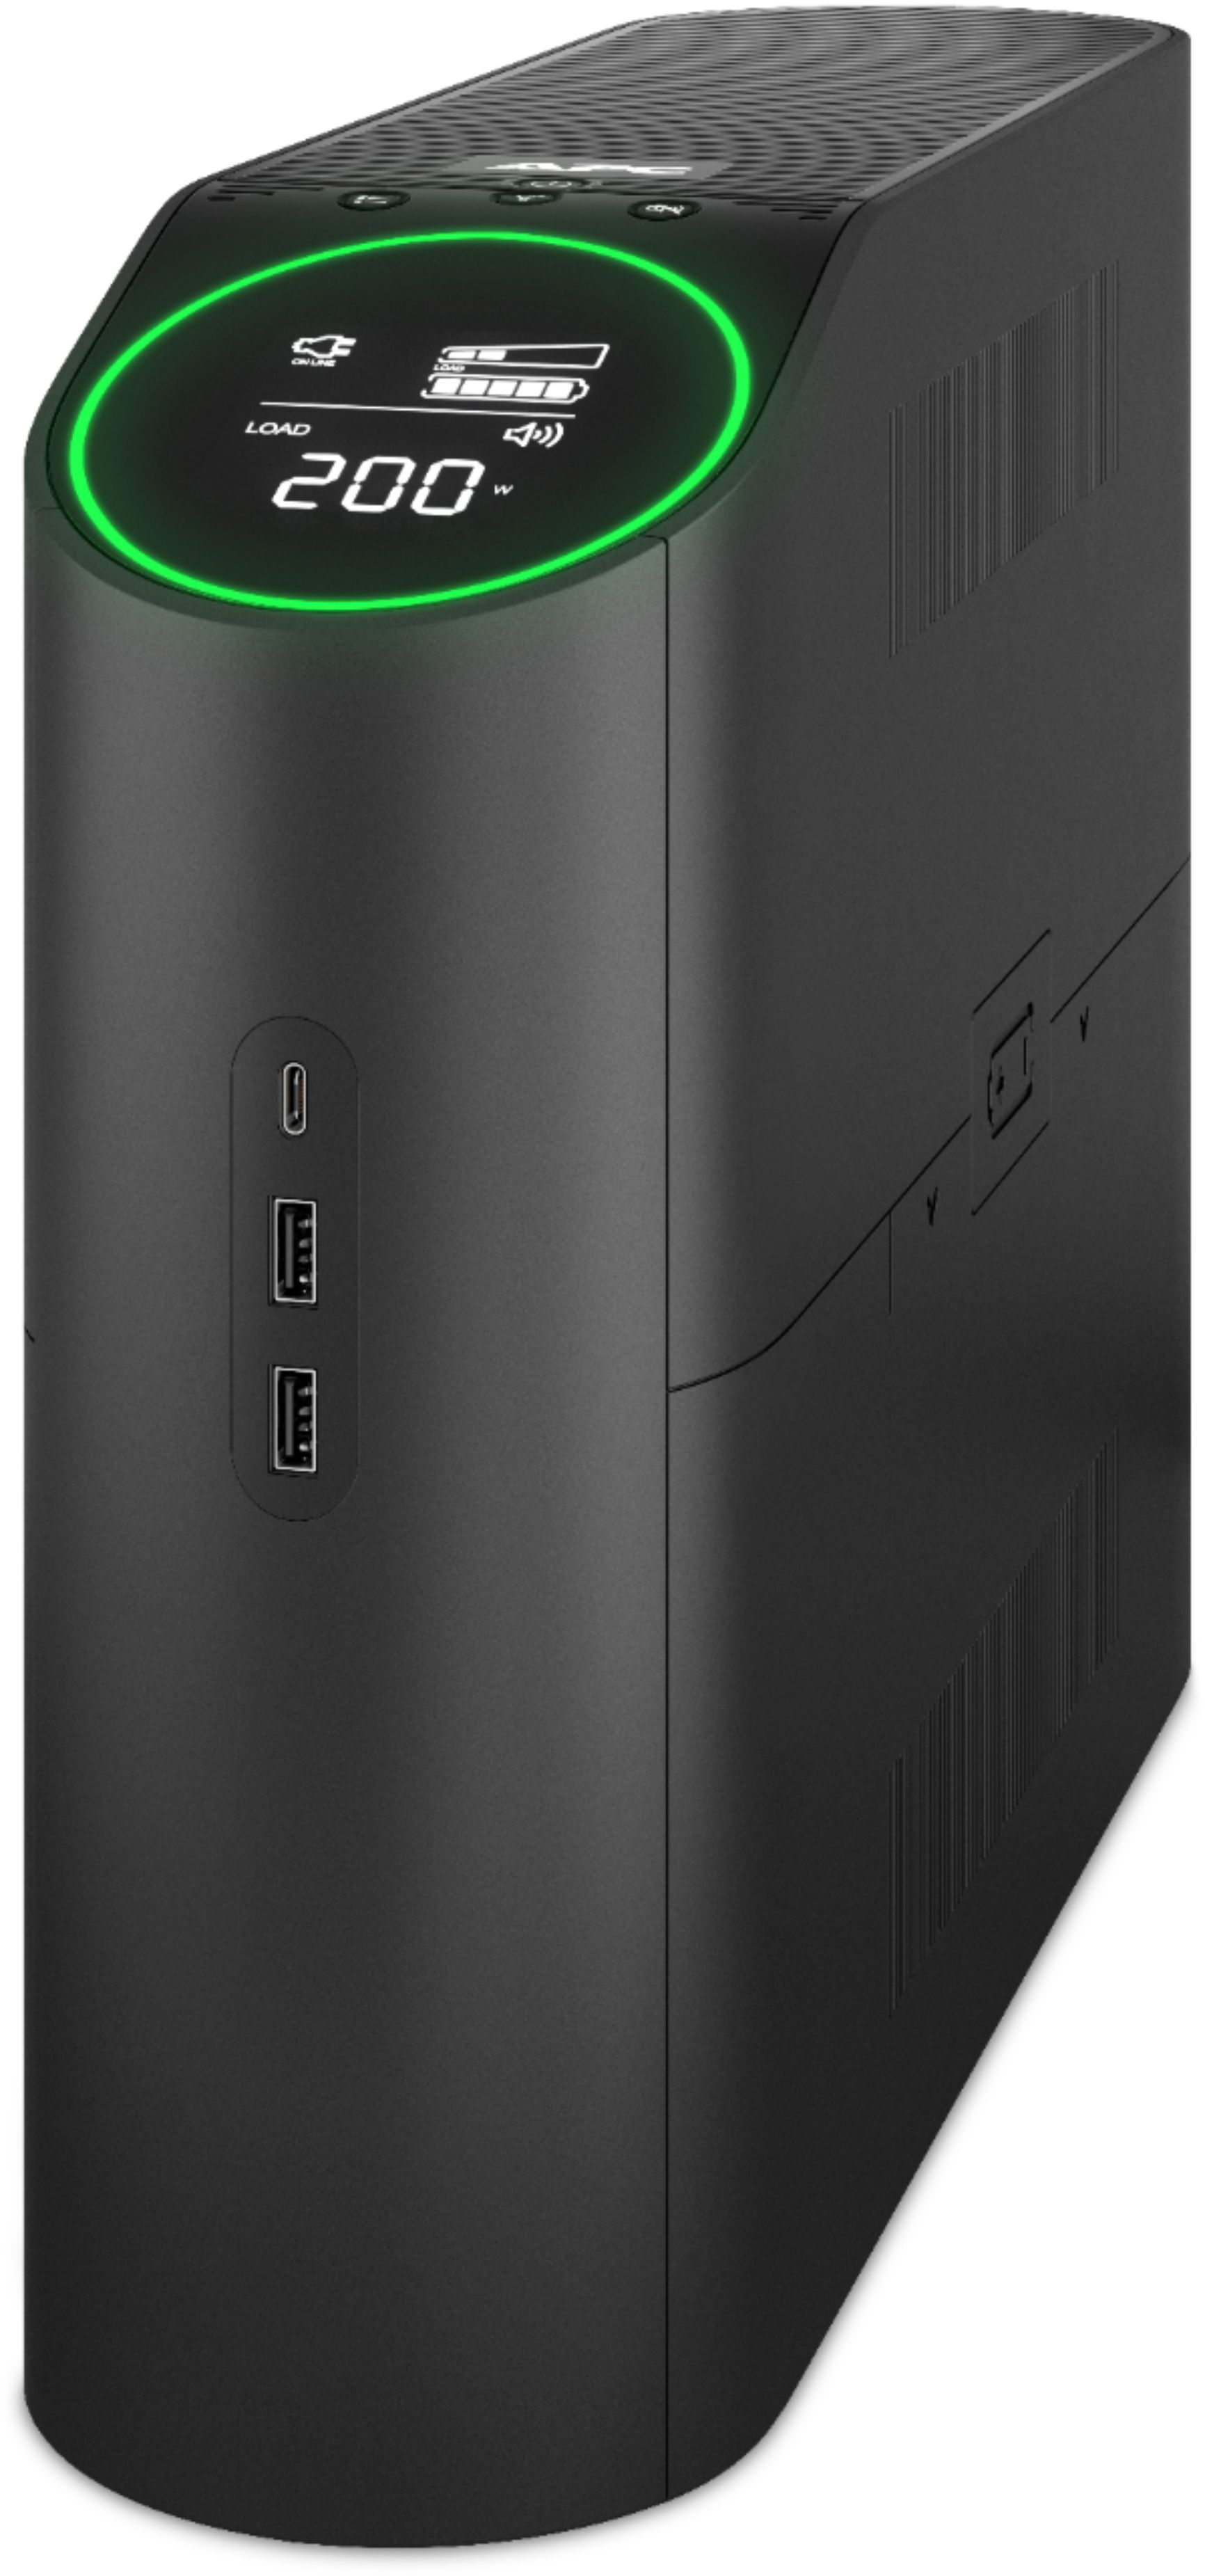 APC - Back-UPS Gaming 1500VA - 10 Outlet/3-USB Battery Back-up and Surge Protector - Midnight Black